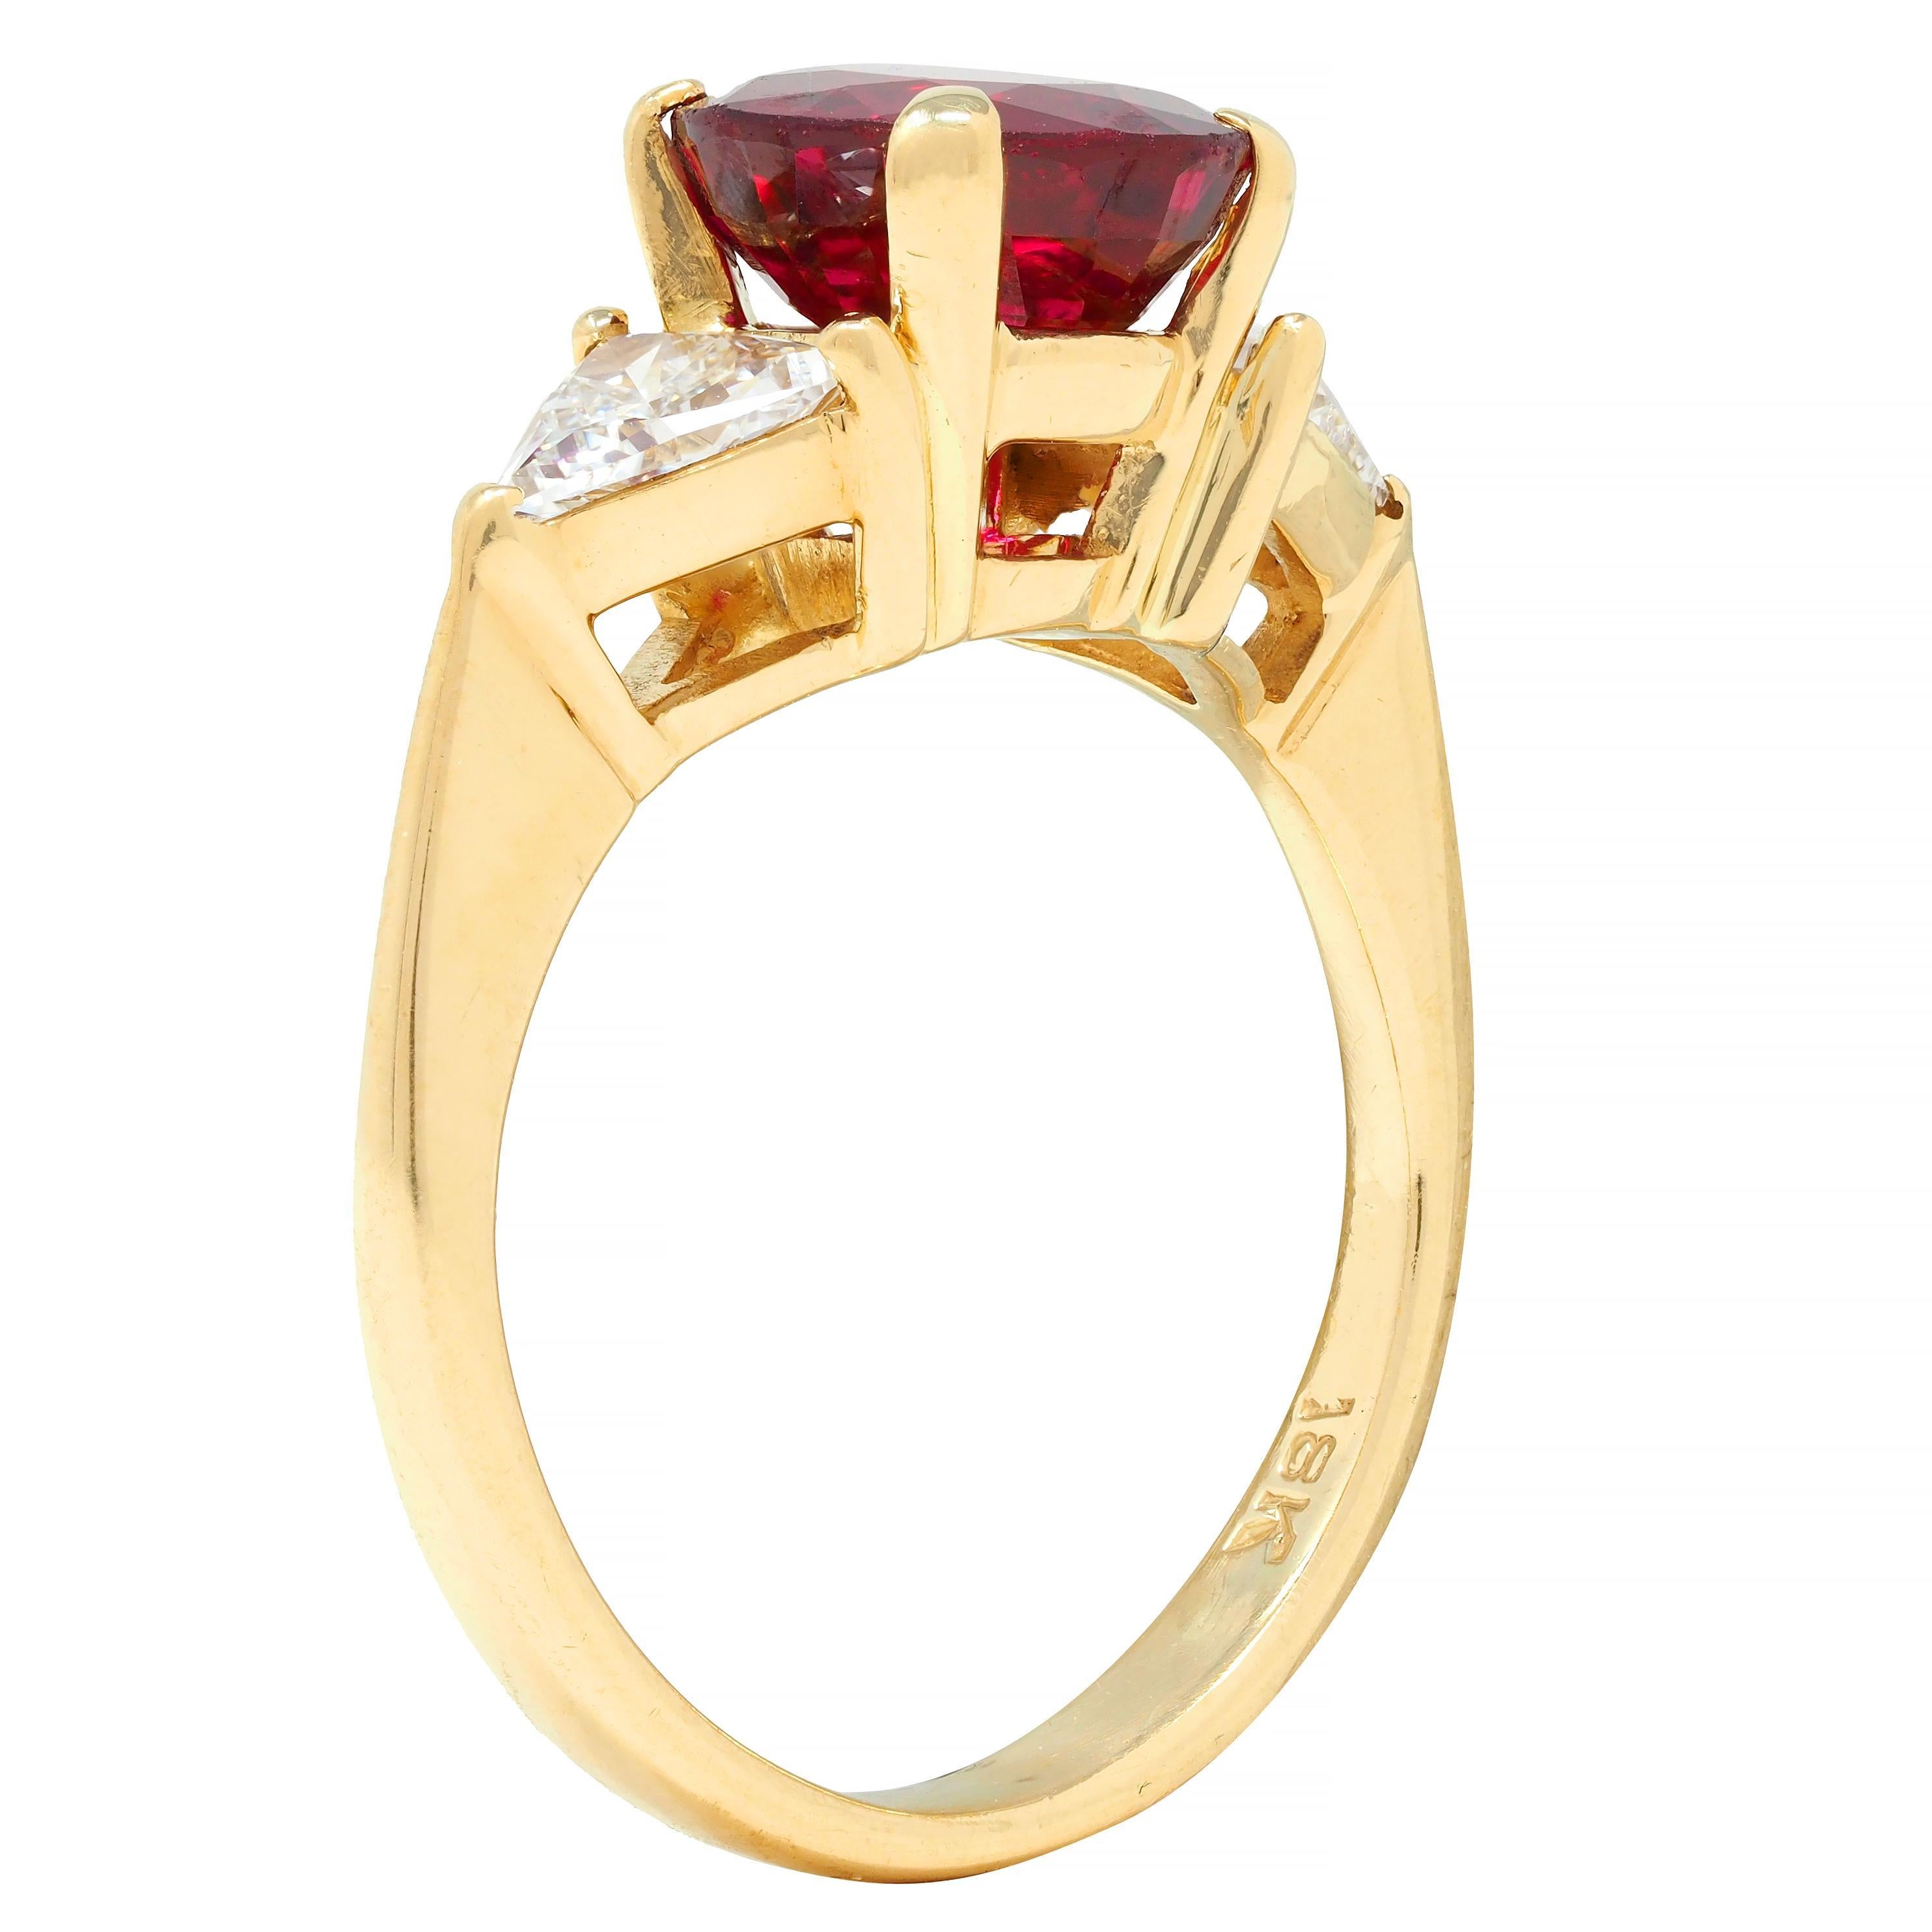 Centering a round cut ruby weighing 2.28 carats - transparent medium red in color 
Natural Thai in origin with no indications of heat treatment 
Prong set in a basket and flanked by trilliant cut diamonds
Weighing approximately 0.52 carat total 
G/H